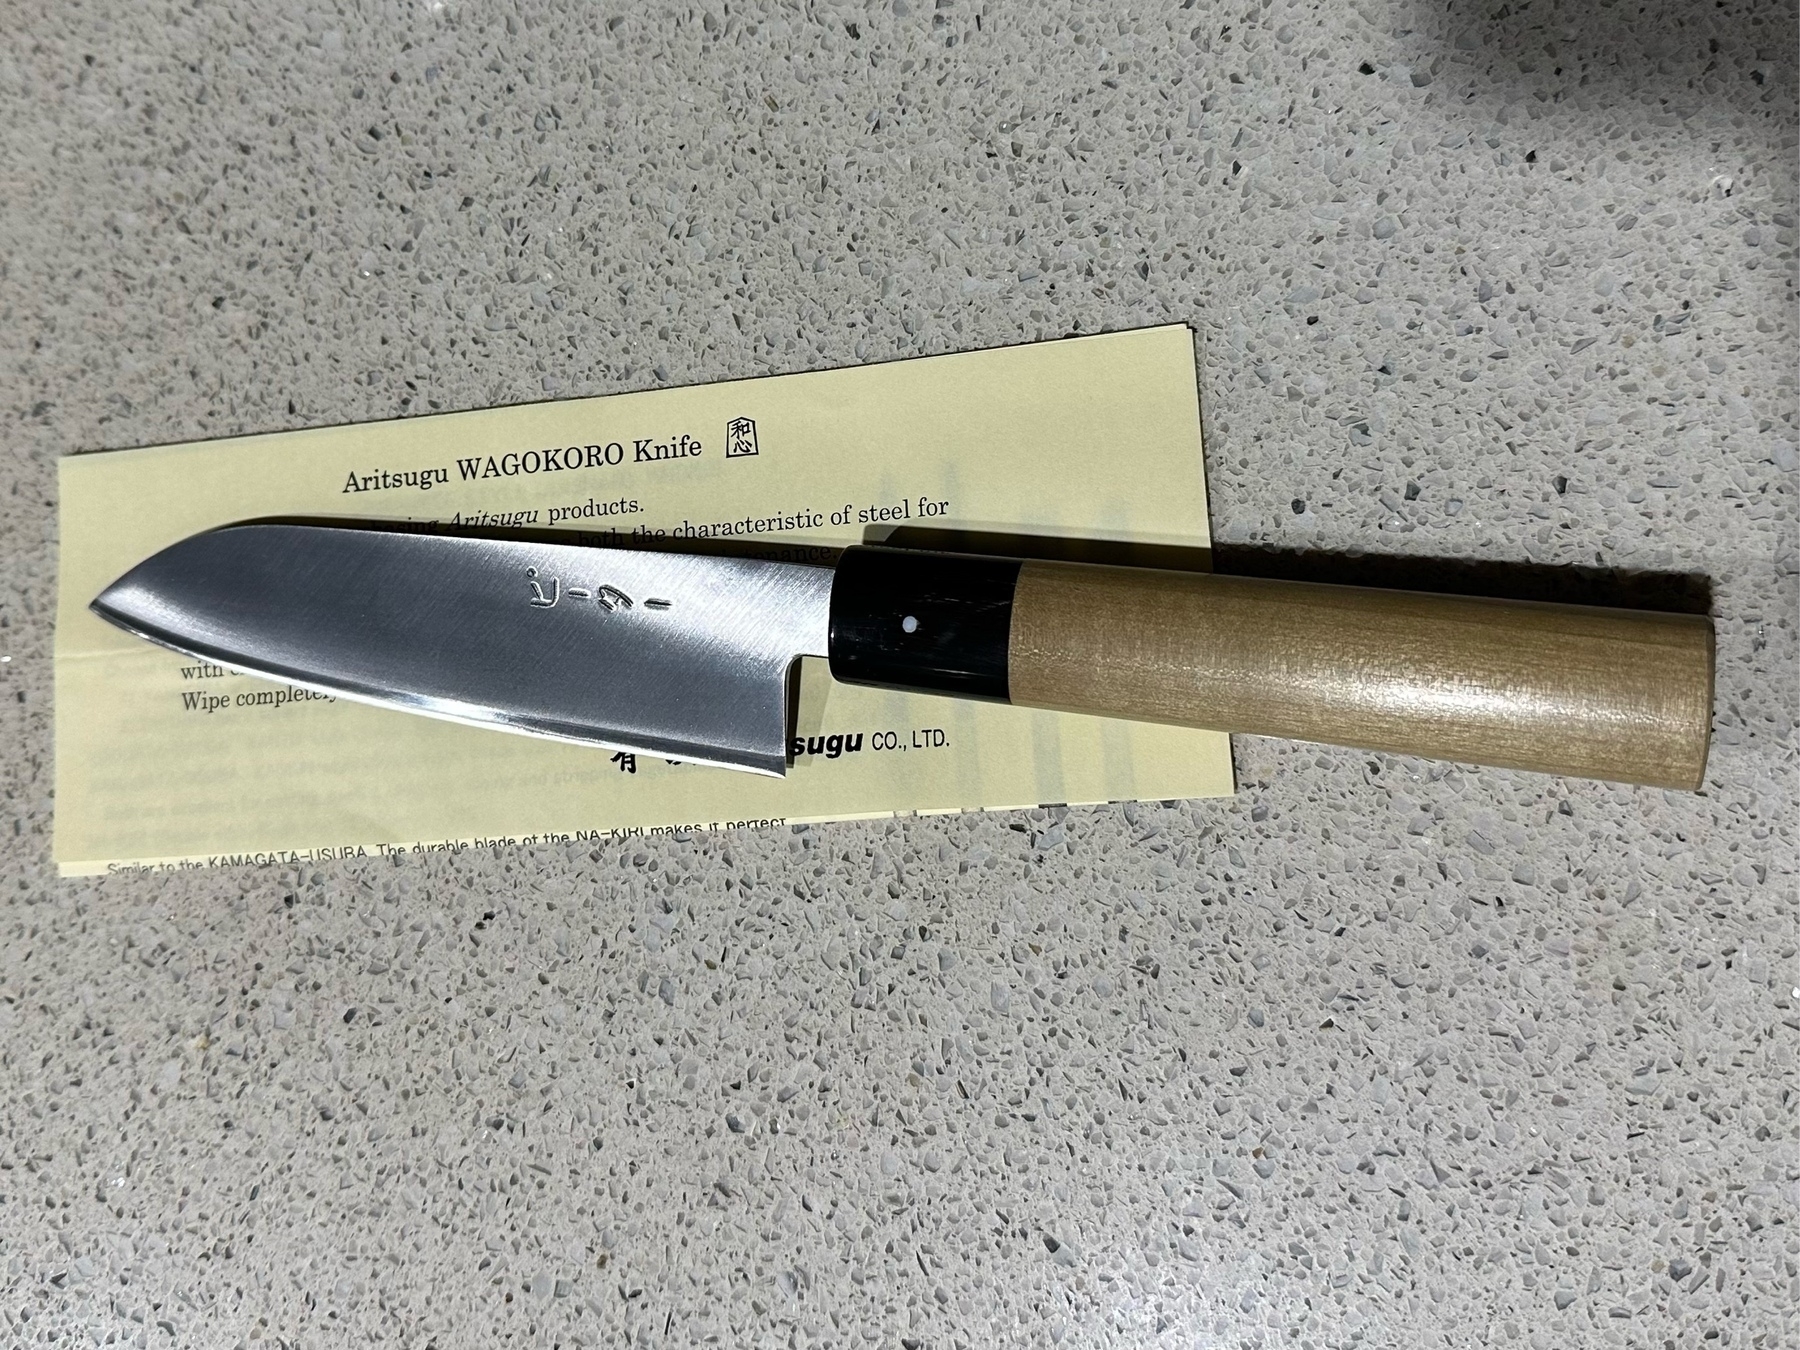 A knife with a wooden handle on a benchtop. The paper under the knife says Aritsugu WAGOKORO knife.